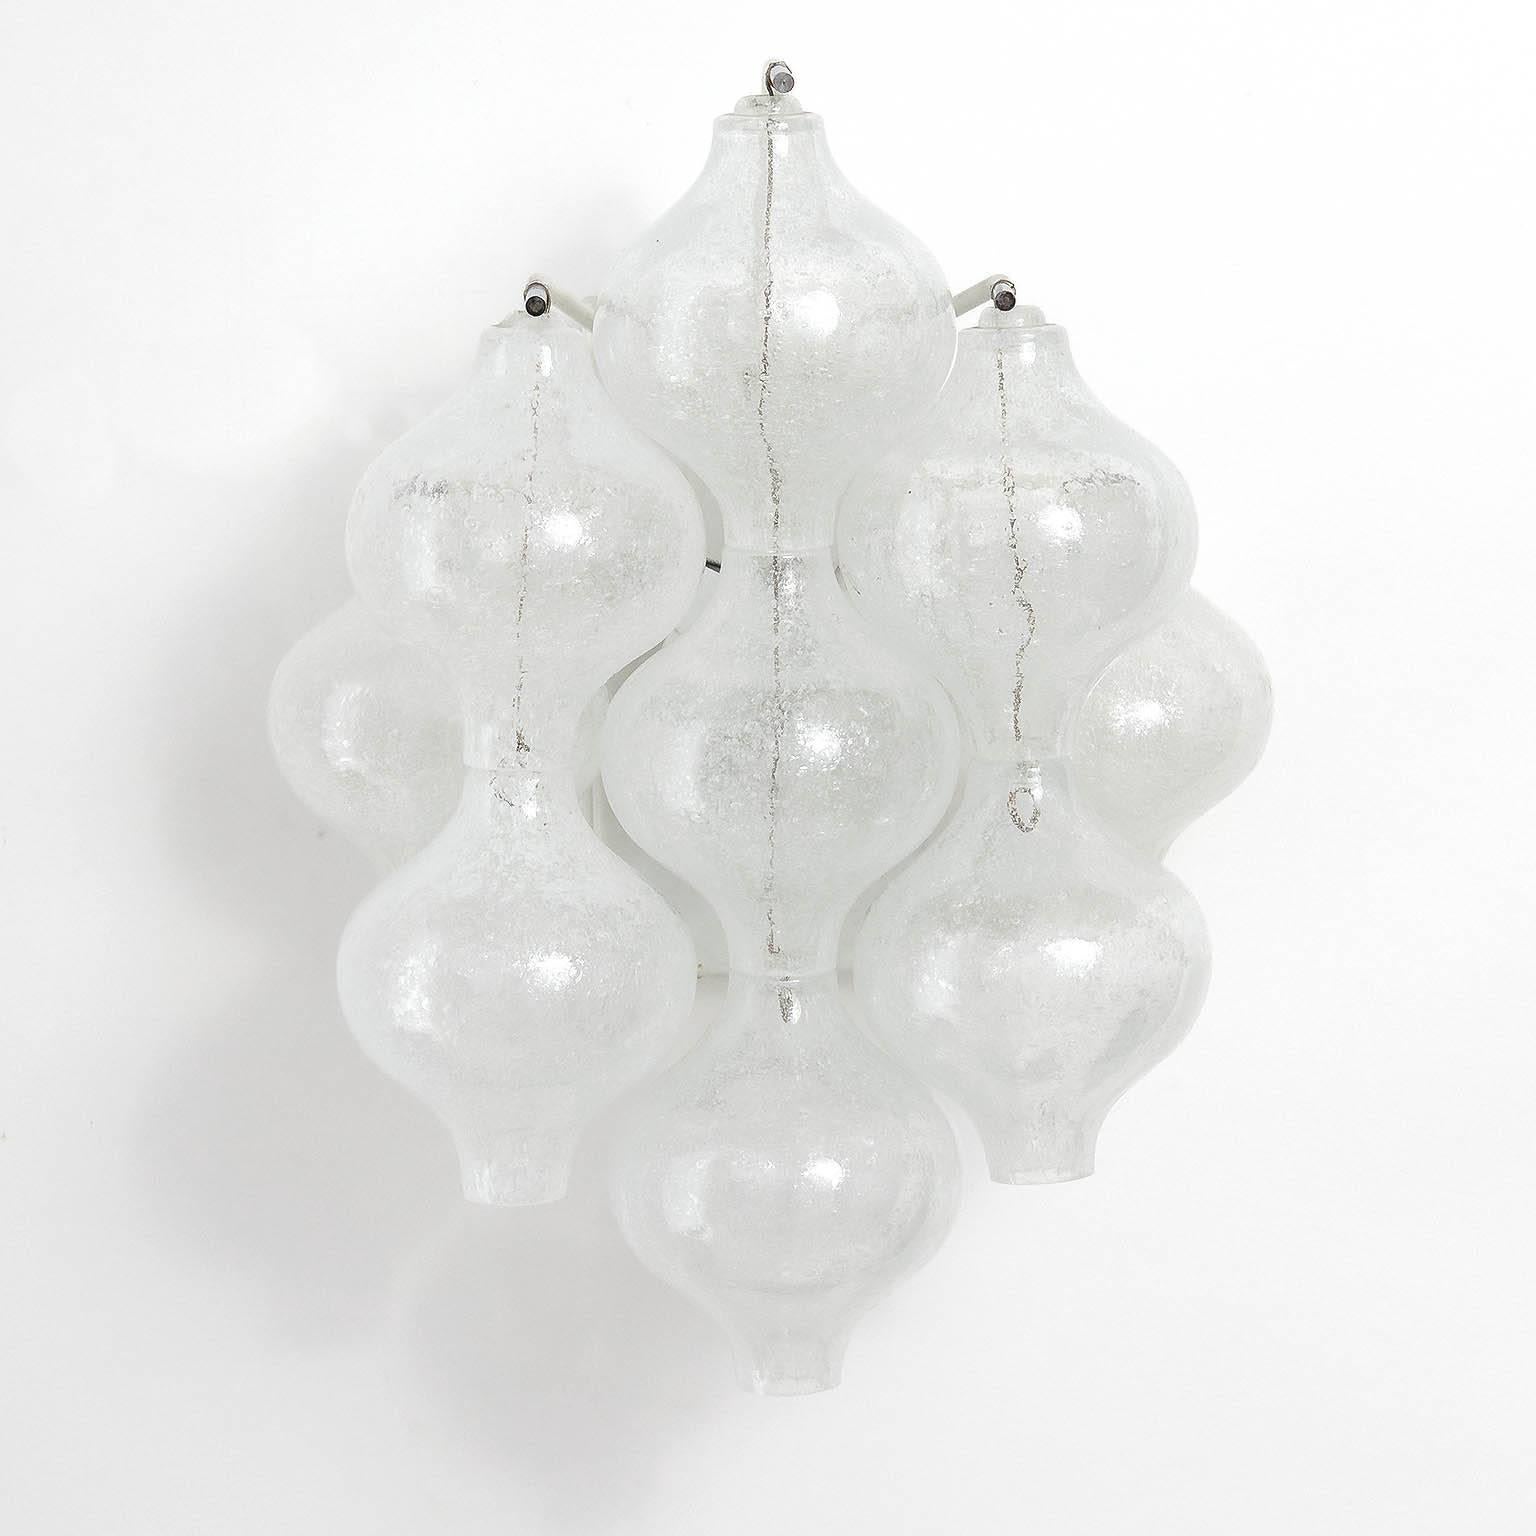 A pair of 'Tulipan' glass wall light fixtures by Kalmar, Austria, Vienna, manufactured in midcentury, circa 1970 (late 1960s or early 1970s). Currently four pairs are available.
The name Tulipan derives from the tulip shaped hand blown bubble